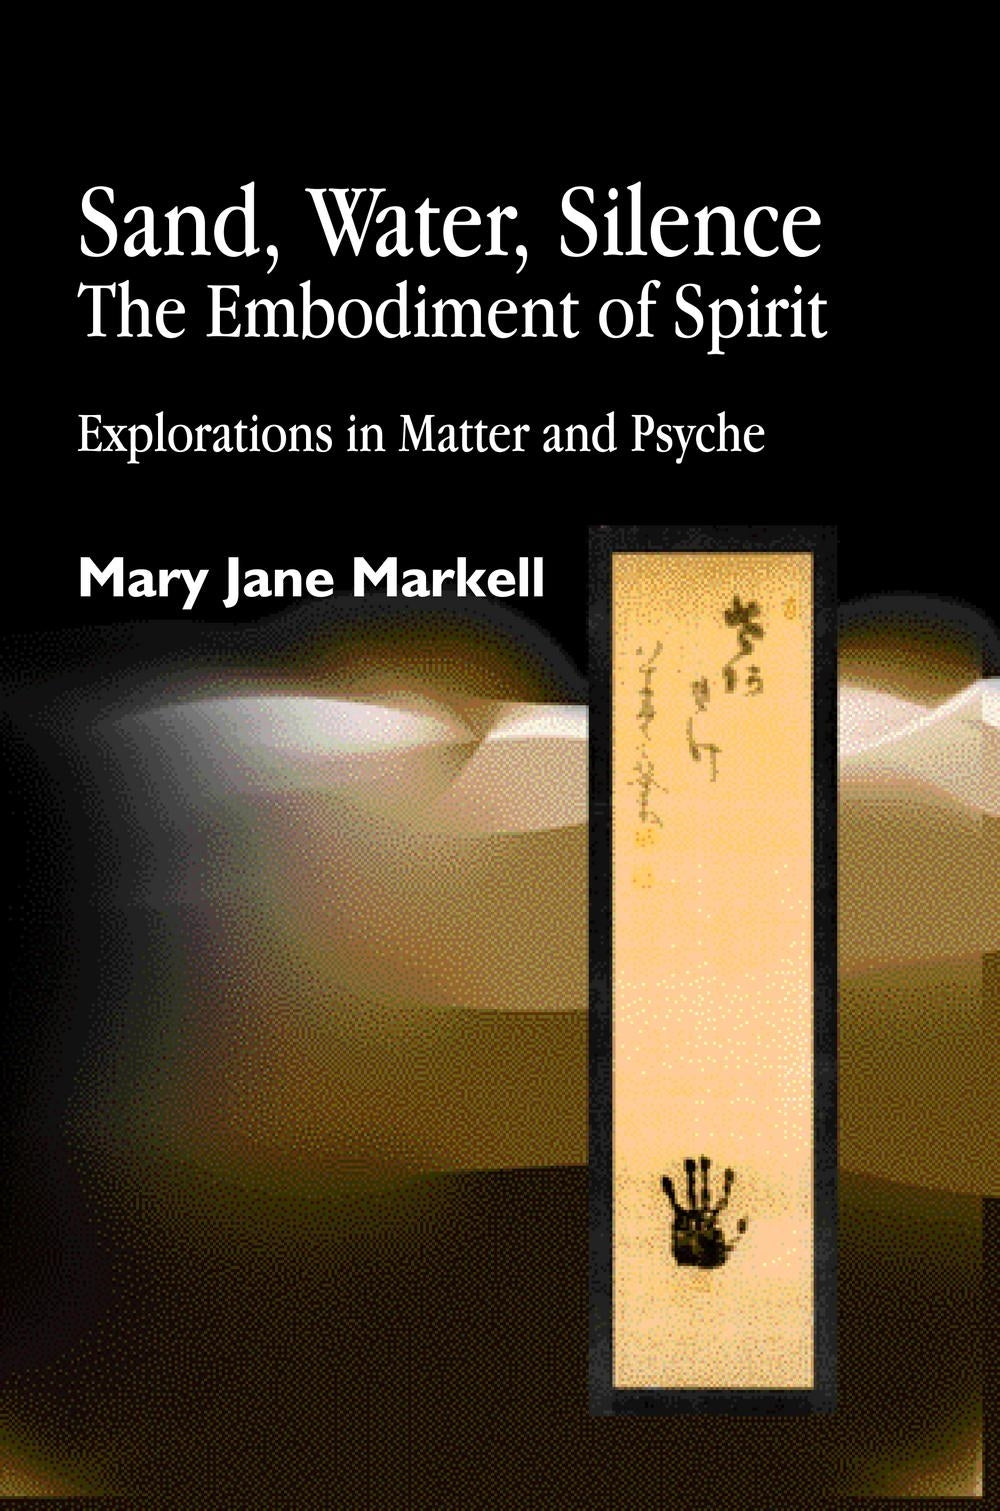 Sand, Water, Silence - The Embodiment of Spirit by Mary Jane Markell